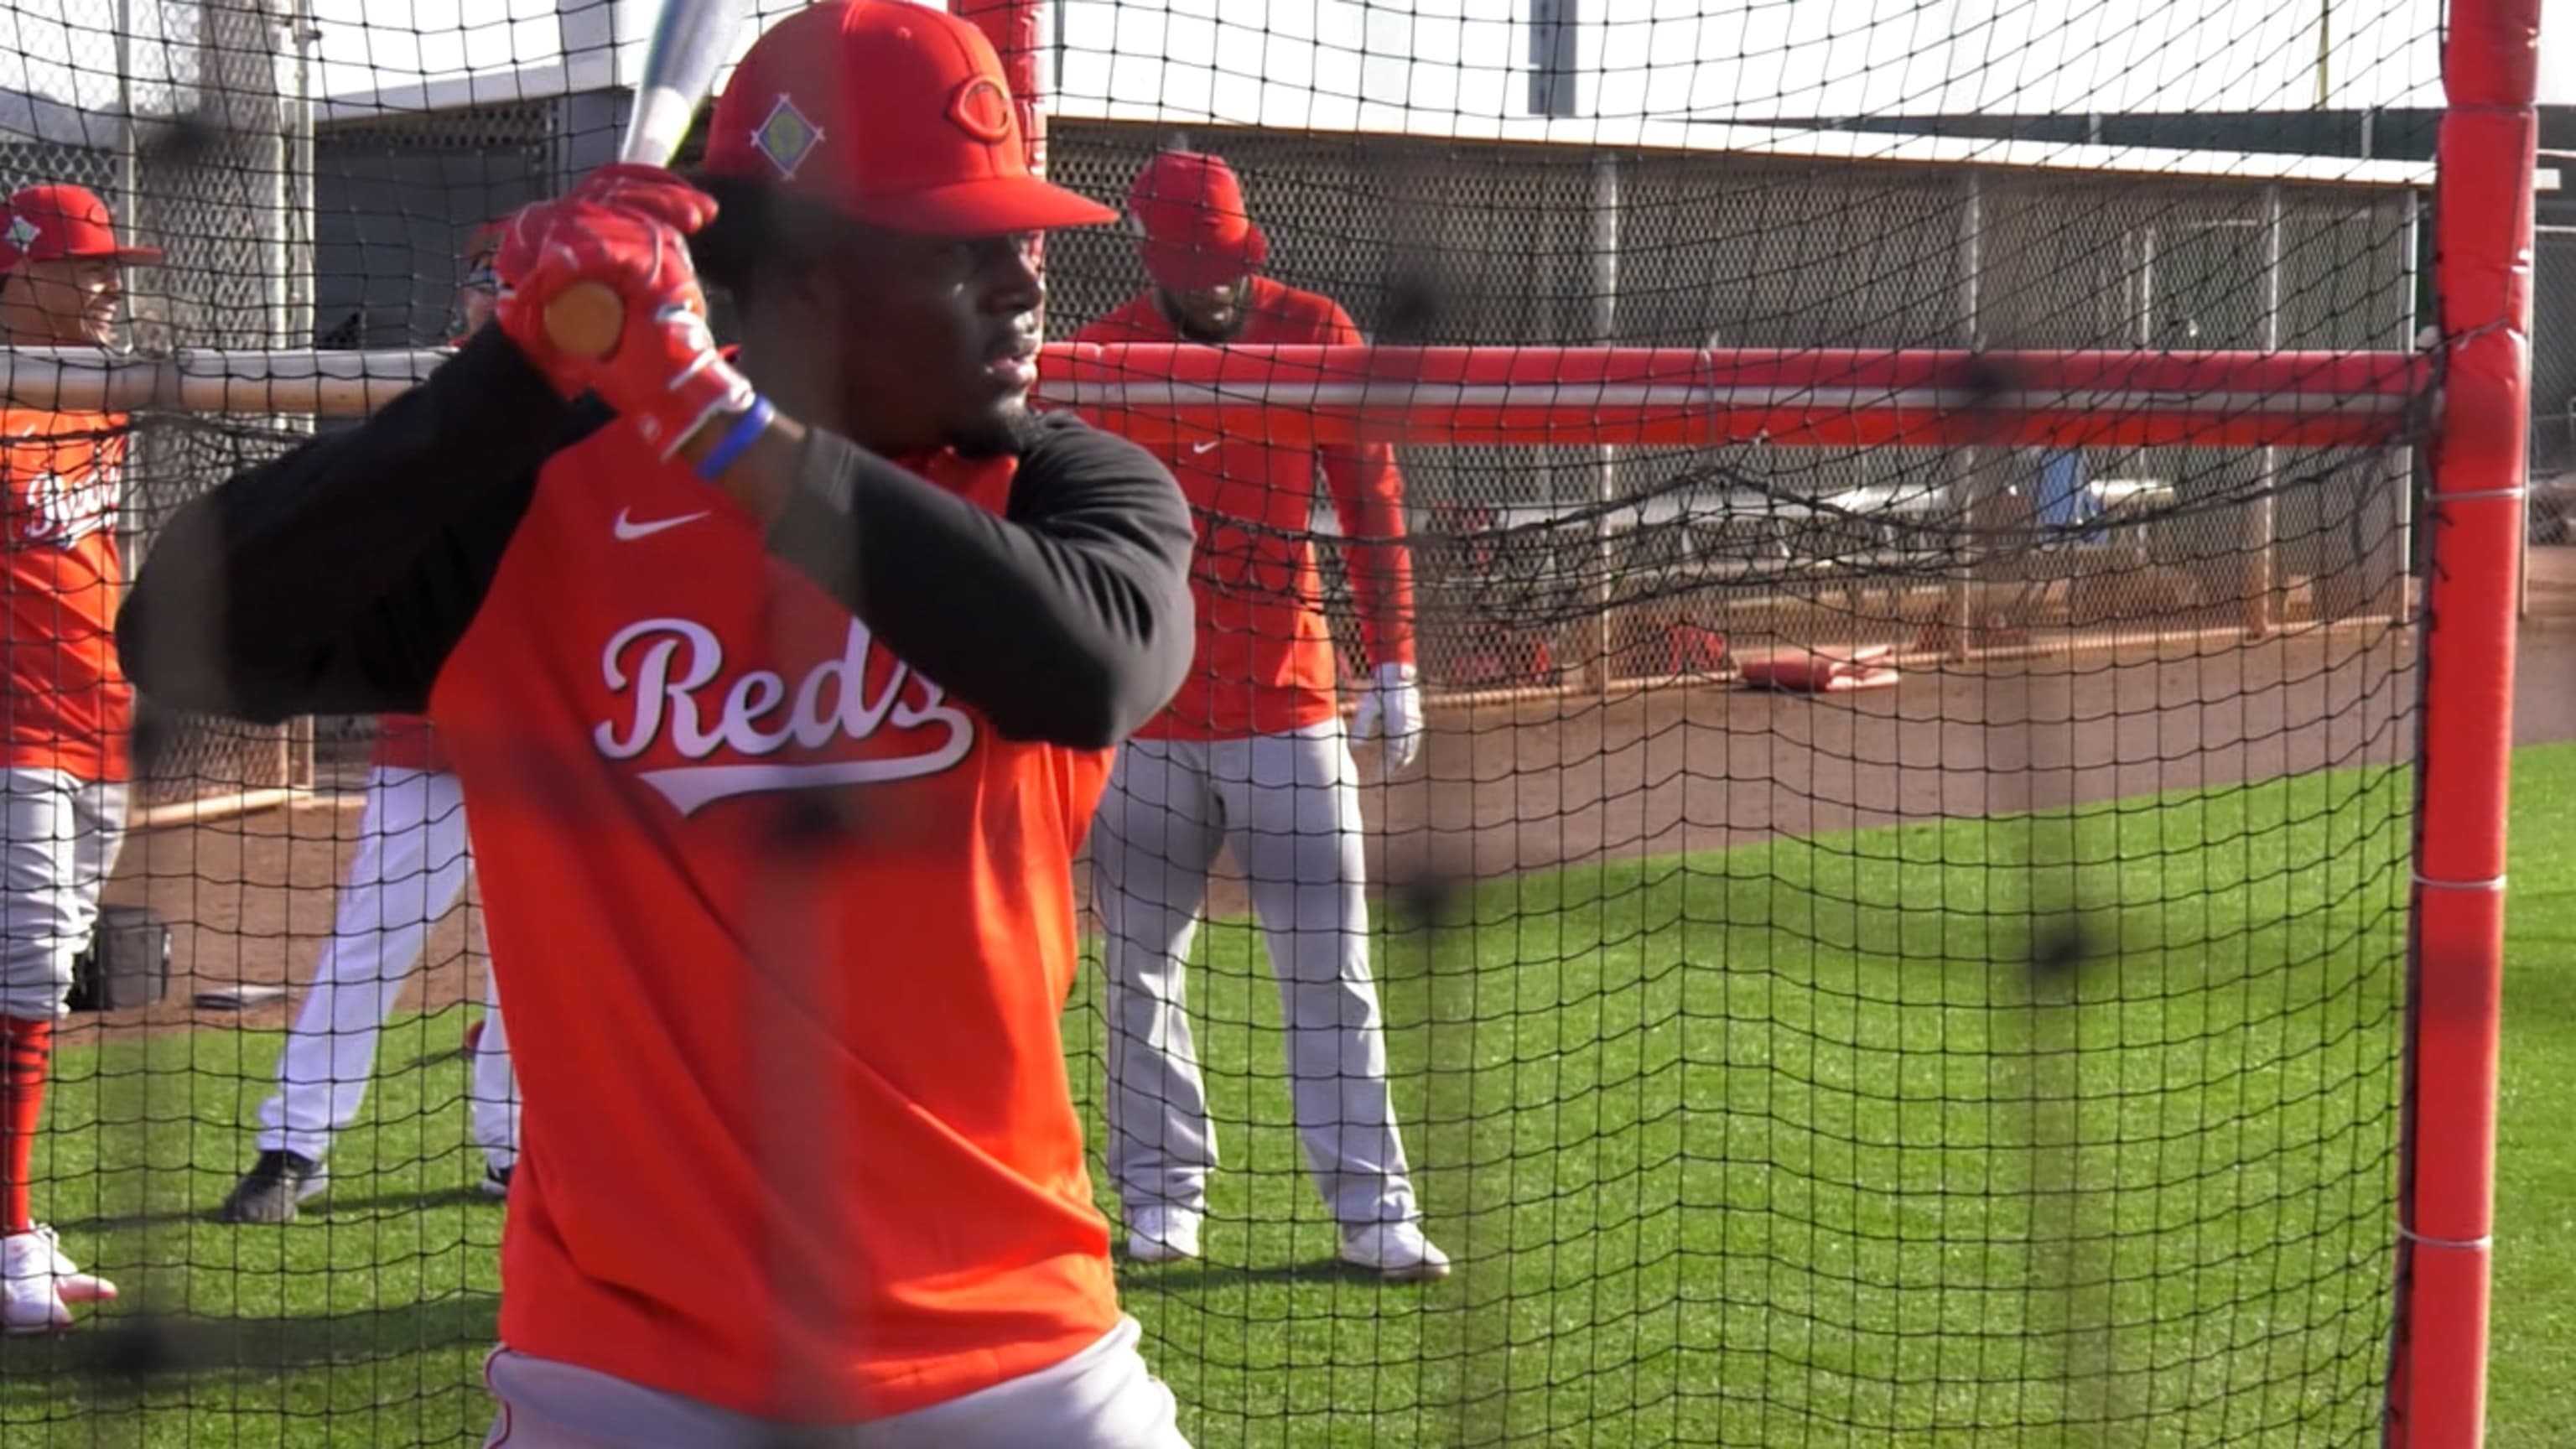 Jay Allen showcasing athleticism at Reds camp